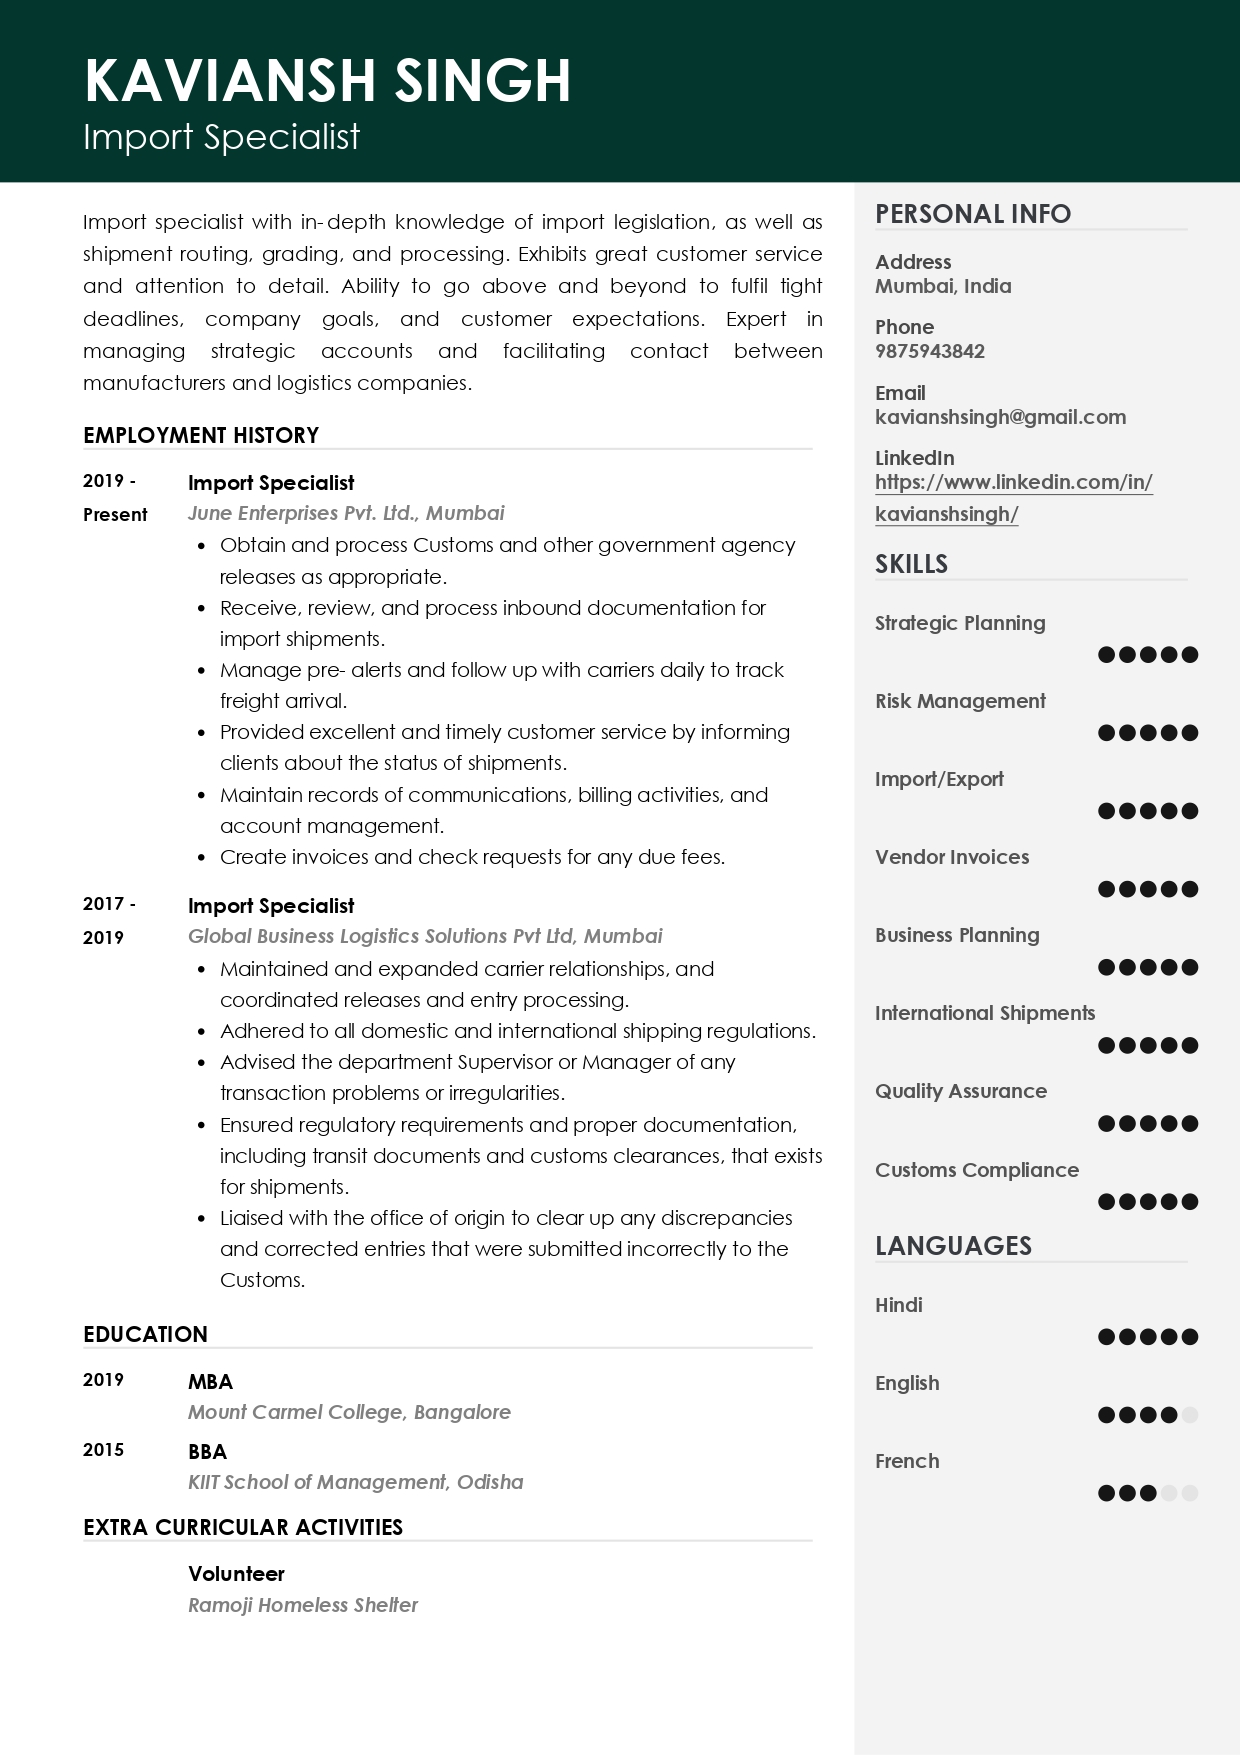 Sample Resume of Import Specialist | Free Resume Templates & Samples on Resumod.co